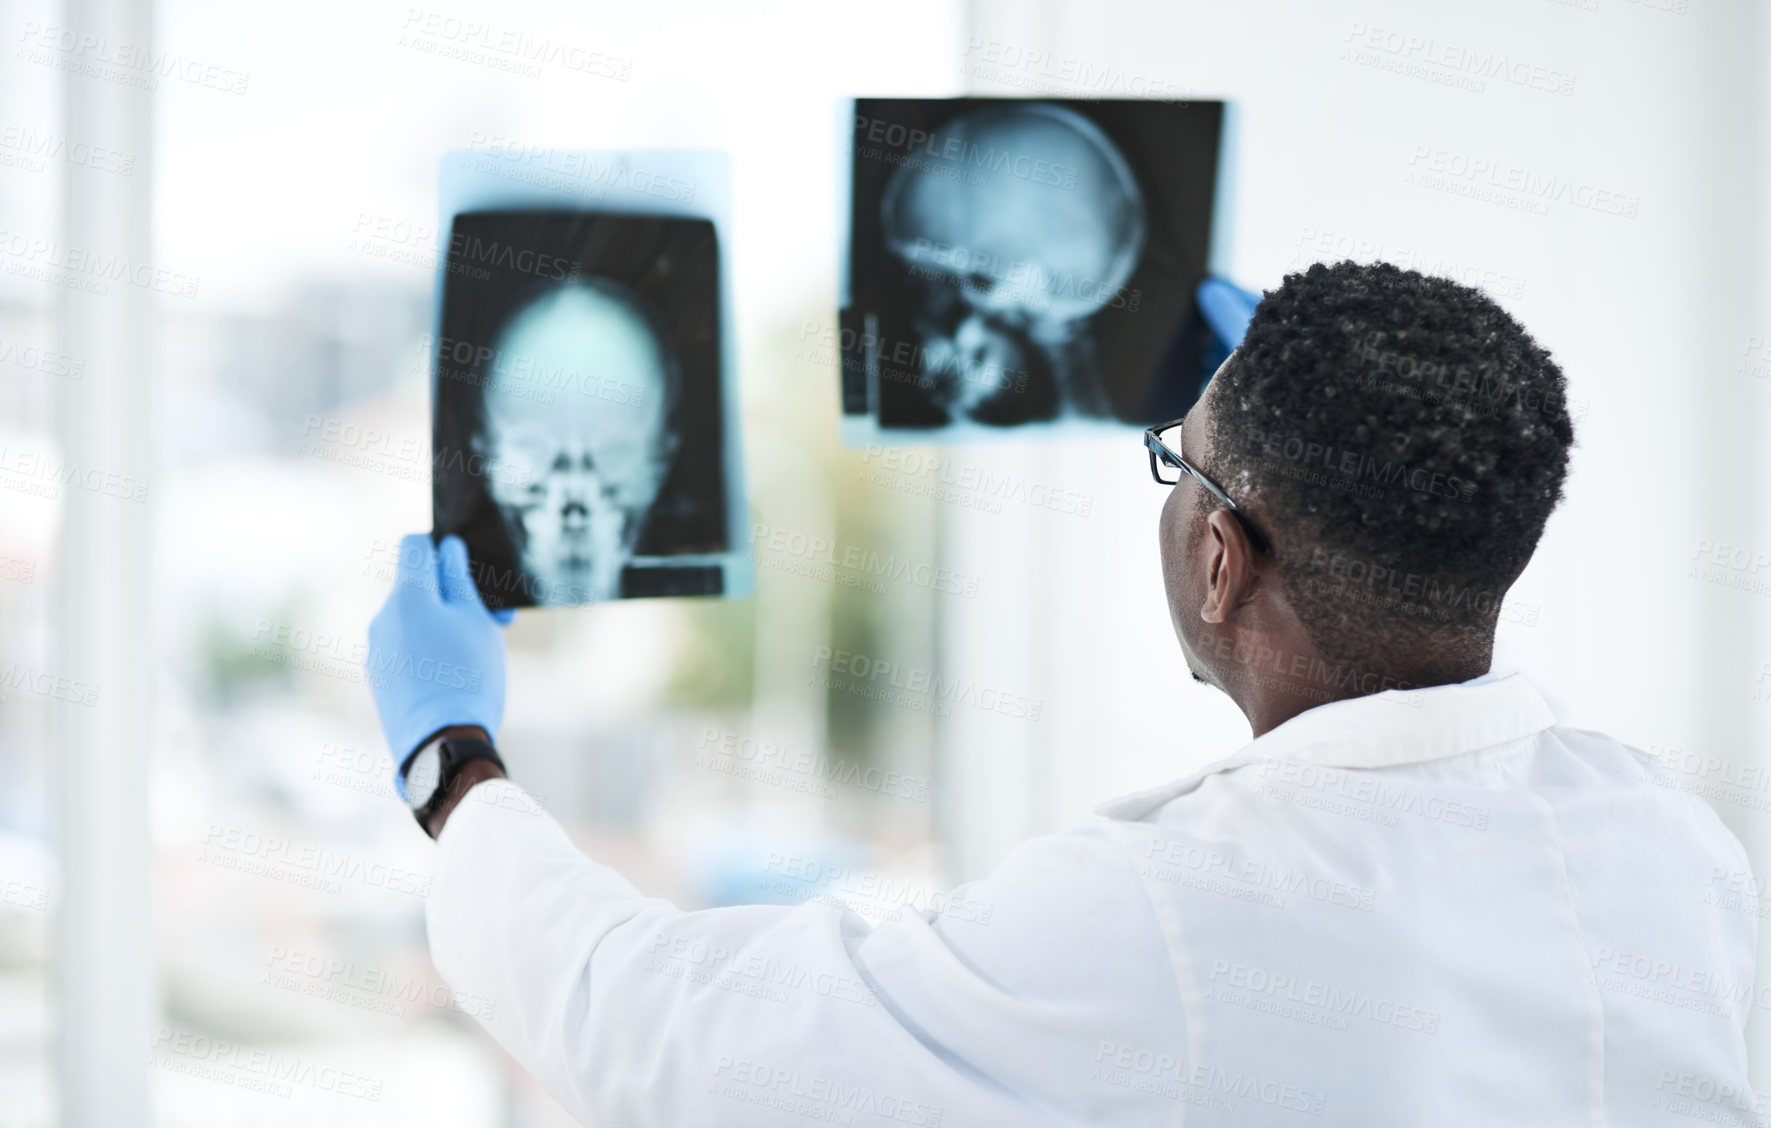 Buy stock photo Shot of a young doctor analysing an x ray of a patient’s skull